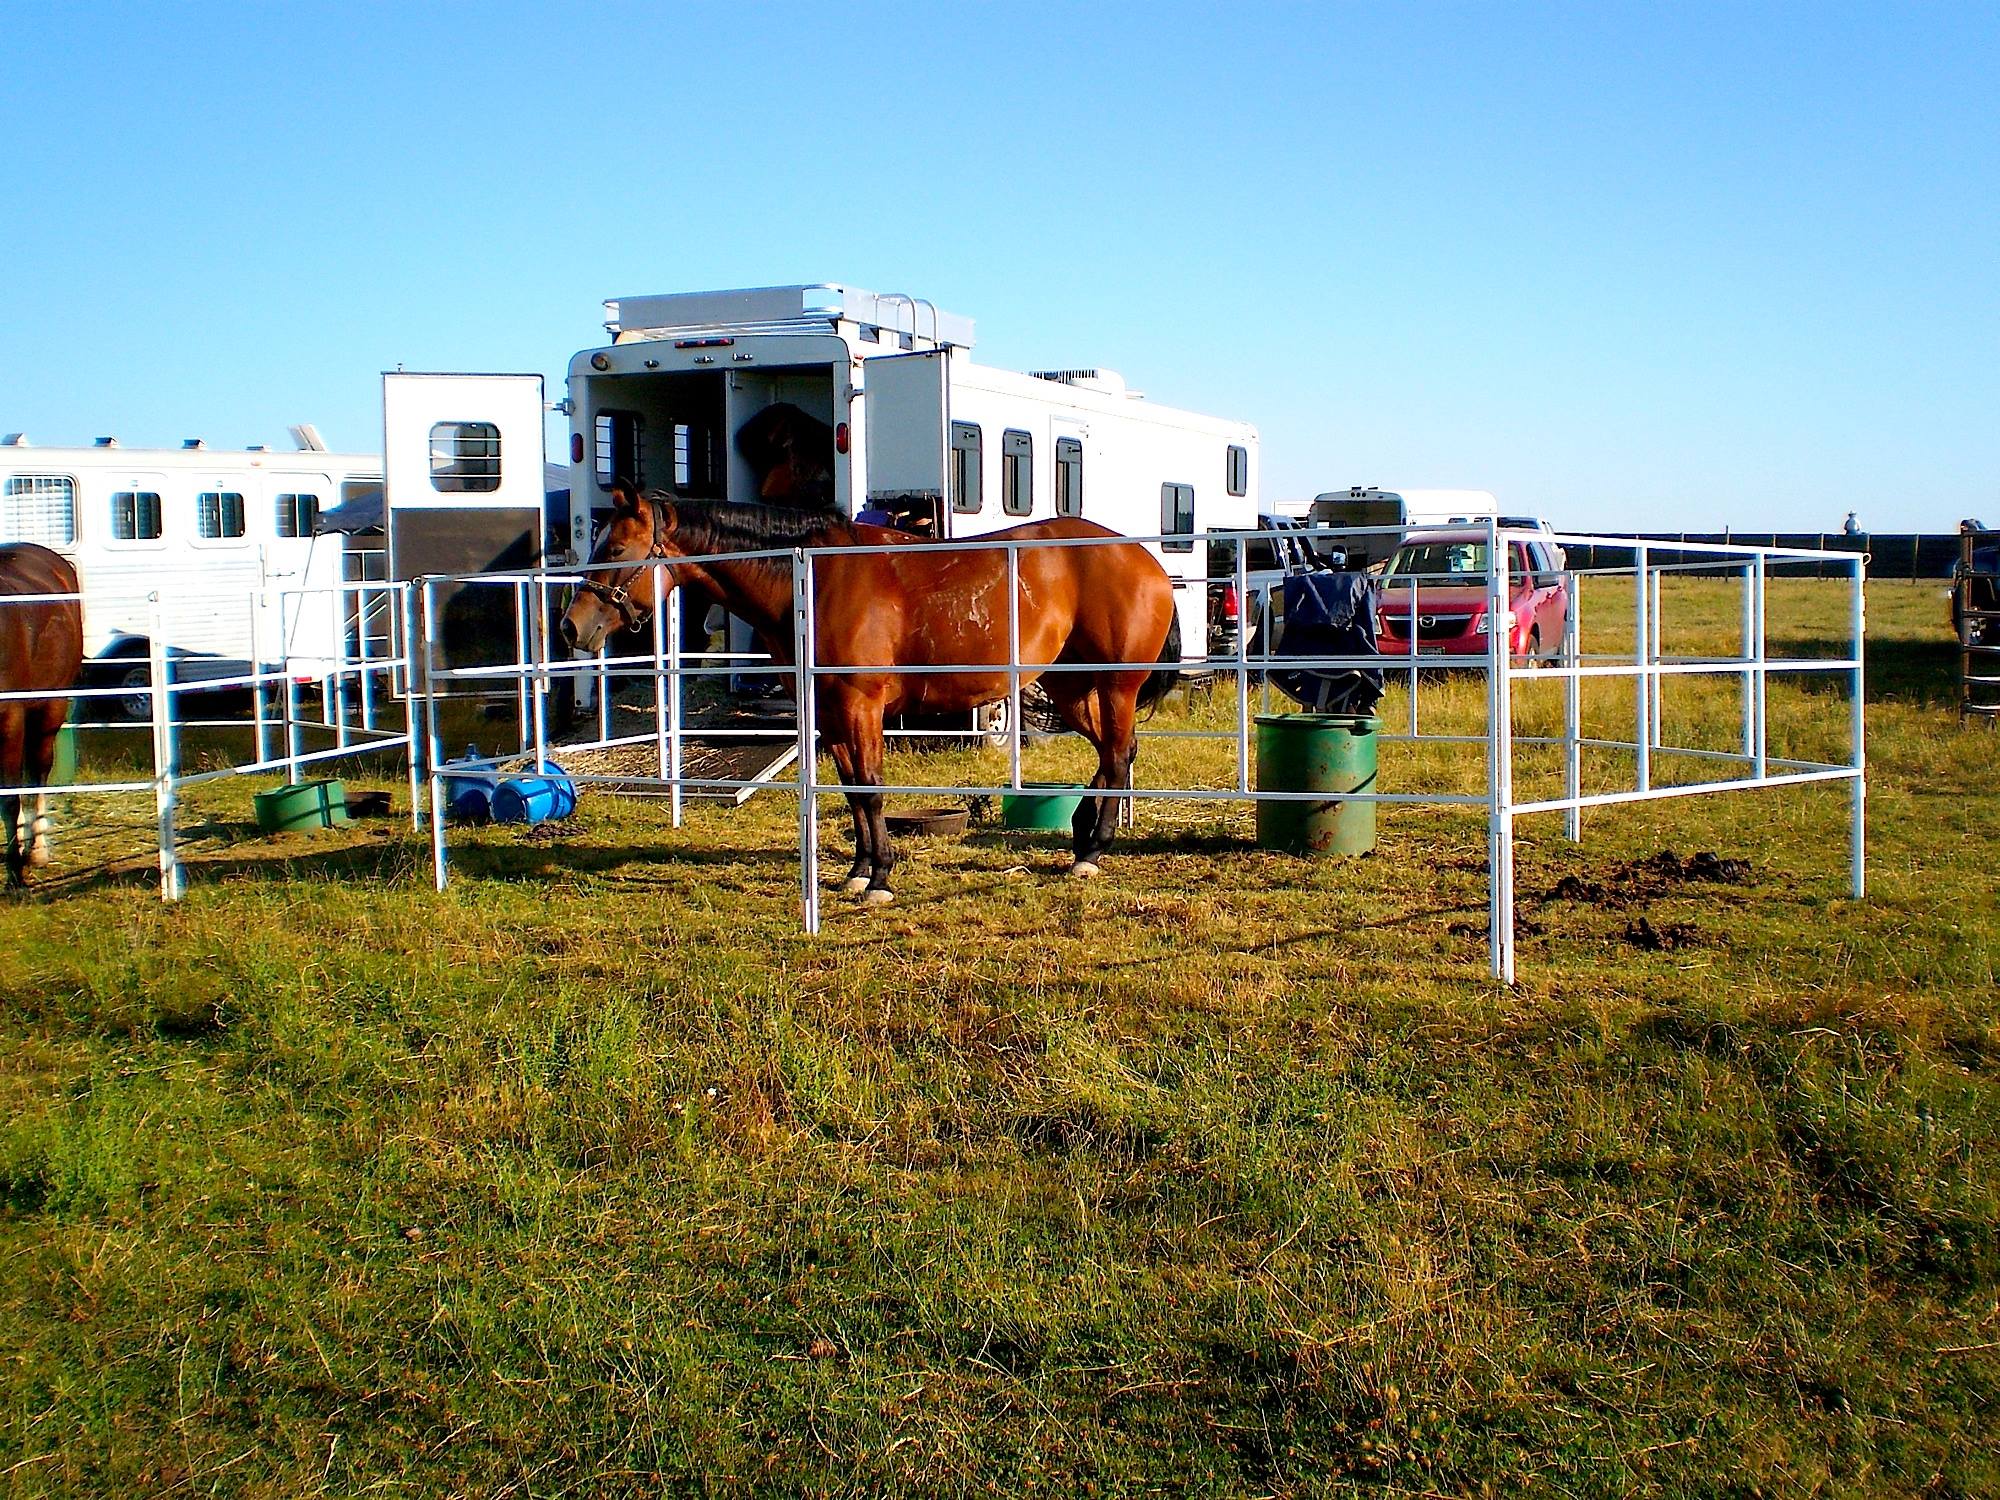 The best travel corral panel system available! Portable horse corrals. Designed for Traveling with Horses. Built for Good.